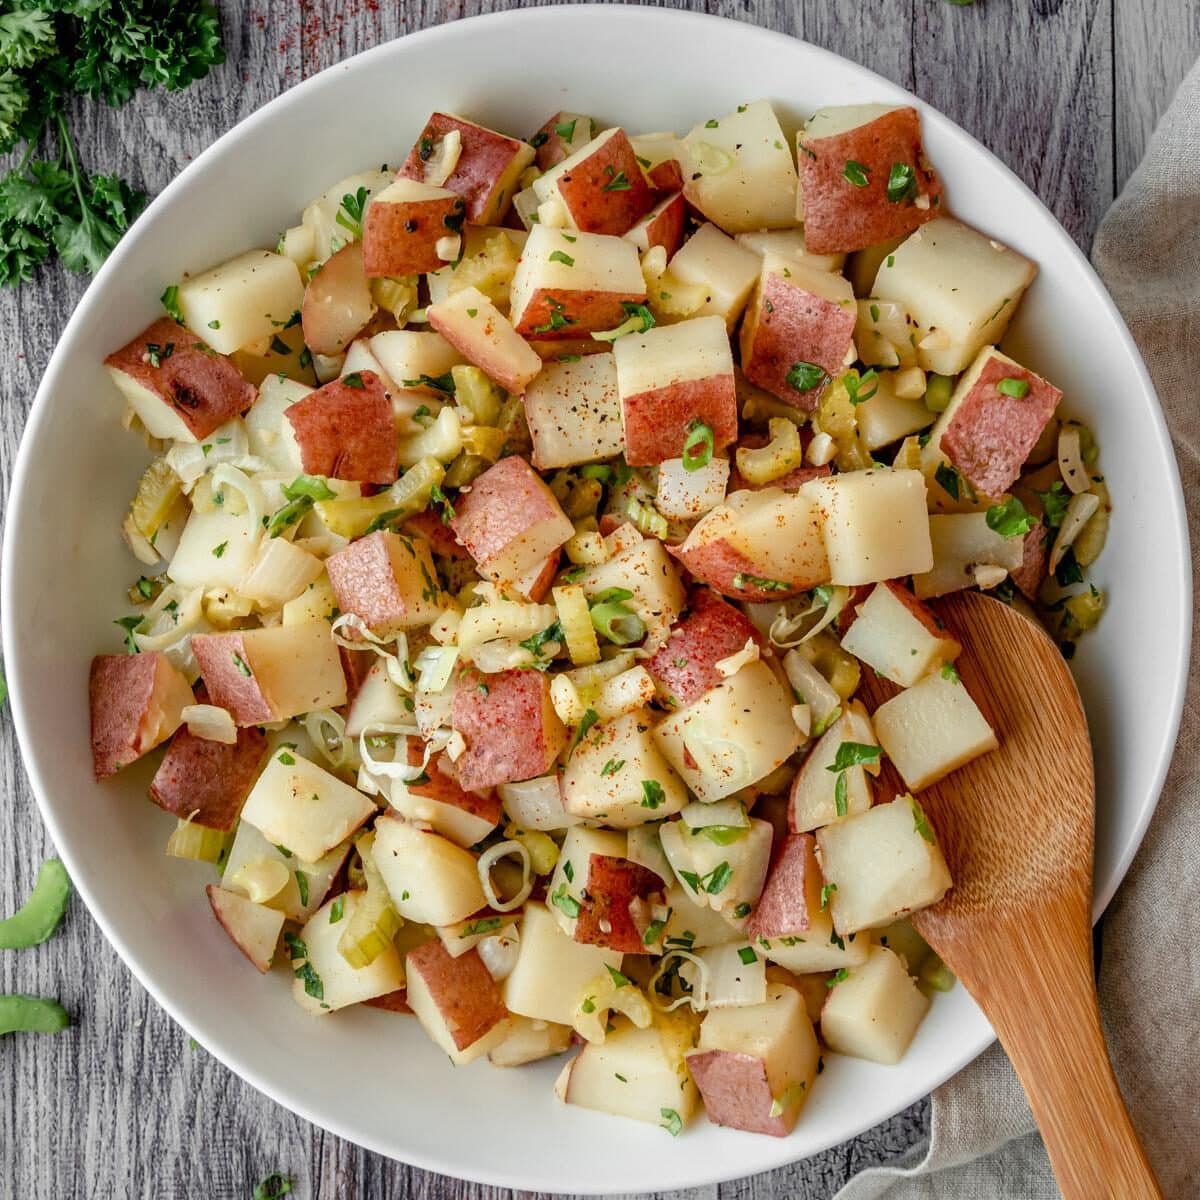 Bowl of German Potato Salad with serving spoon.